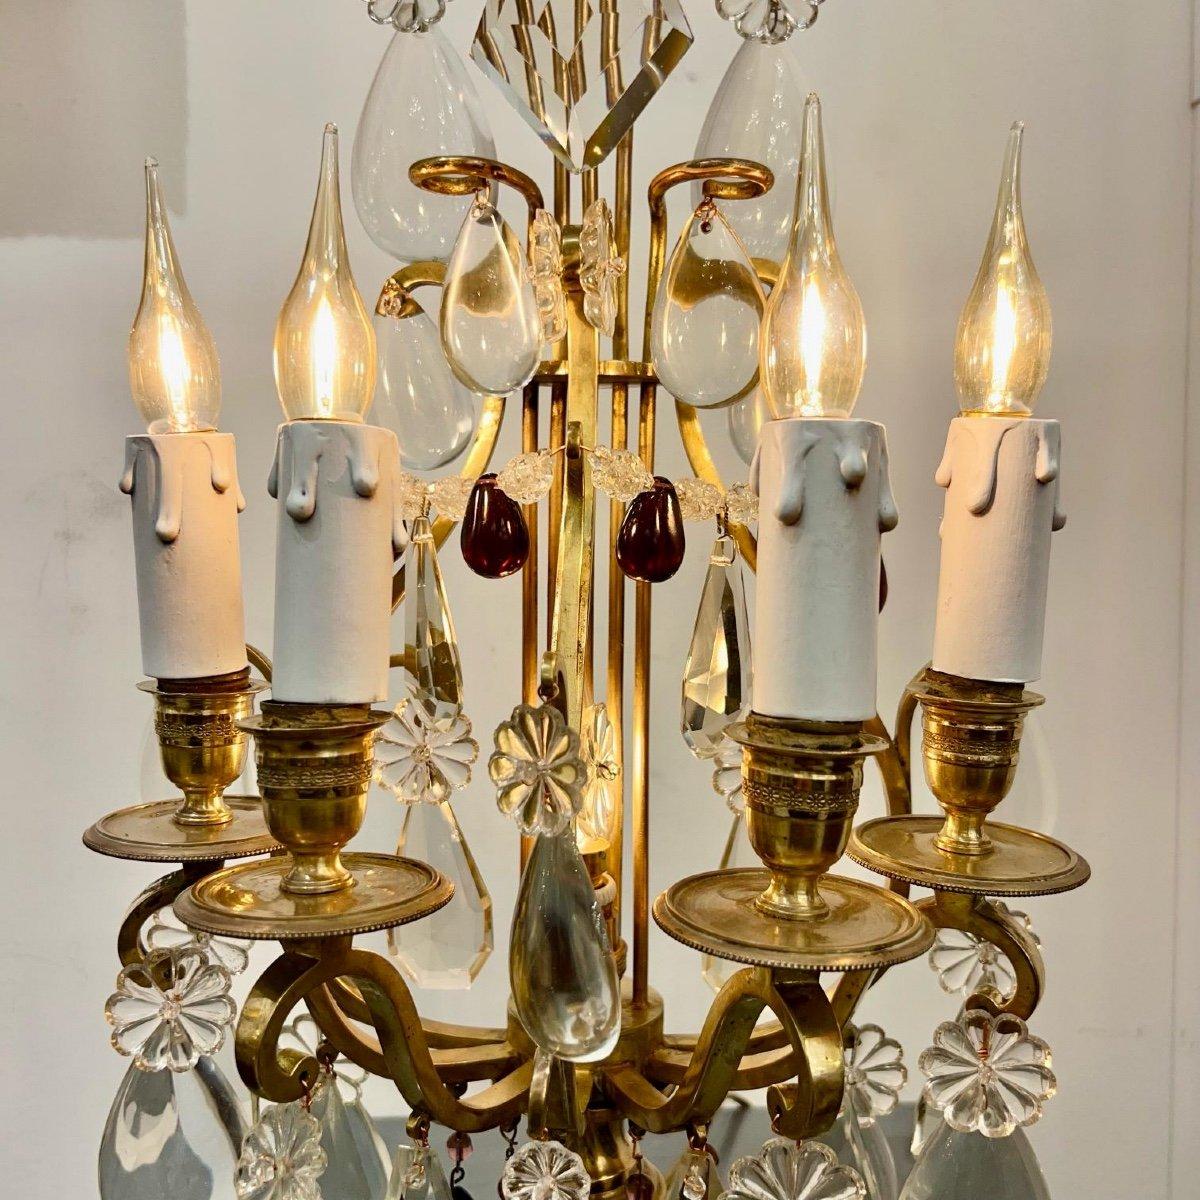 Late 19th Century Pair of Lyre Shaped Four-Light Candelabras For Sale 5